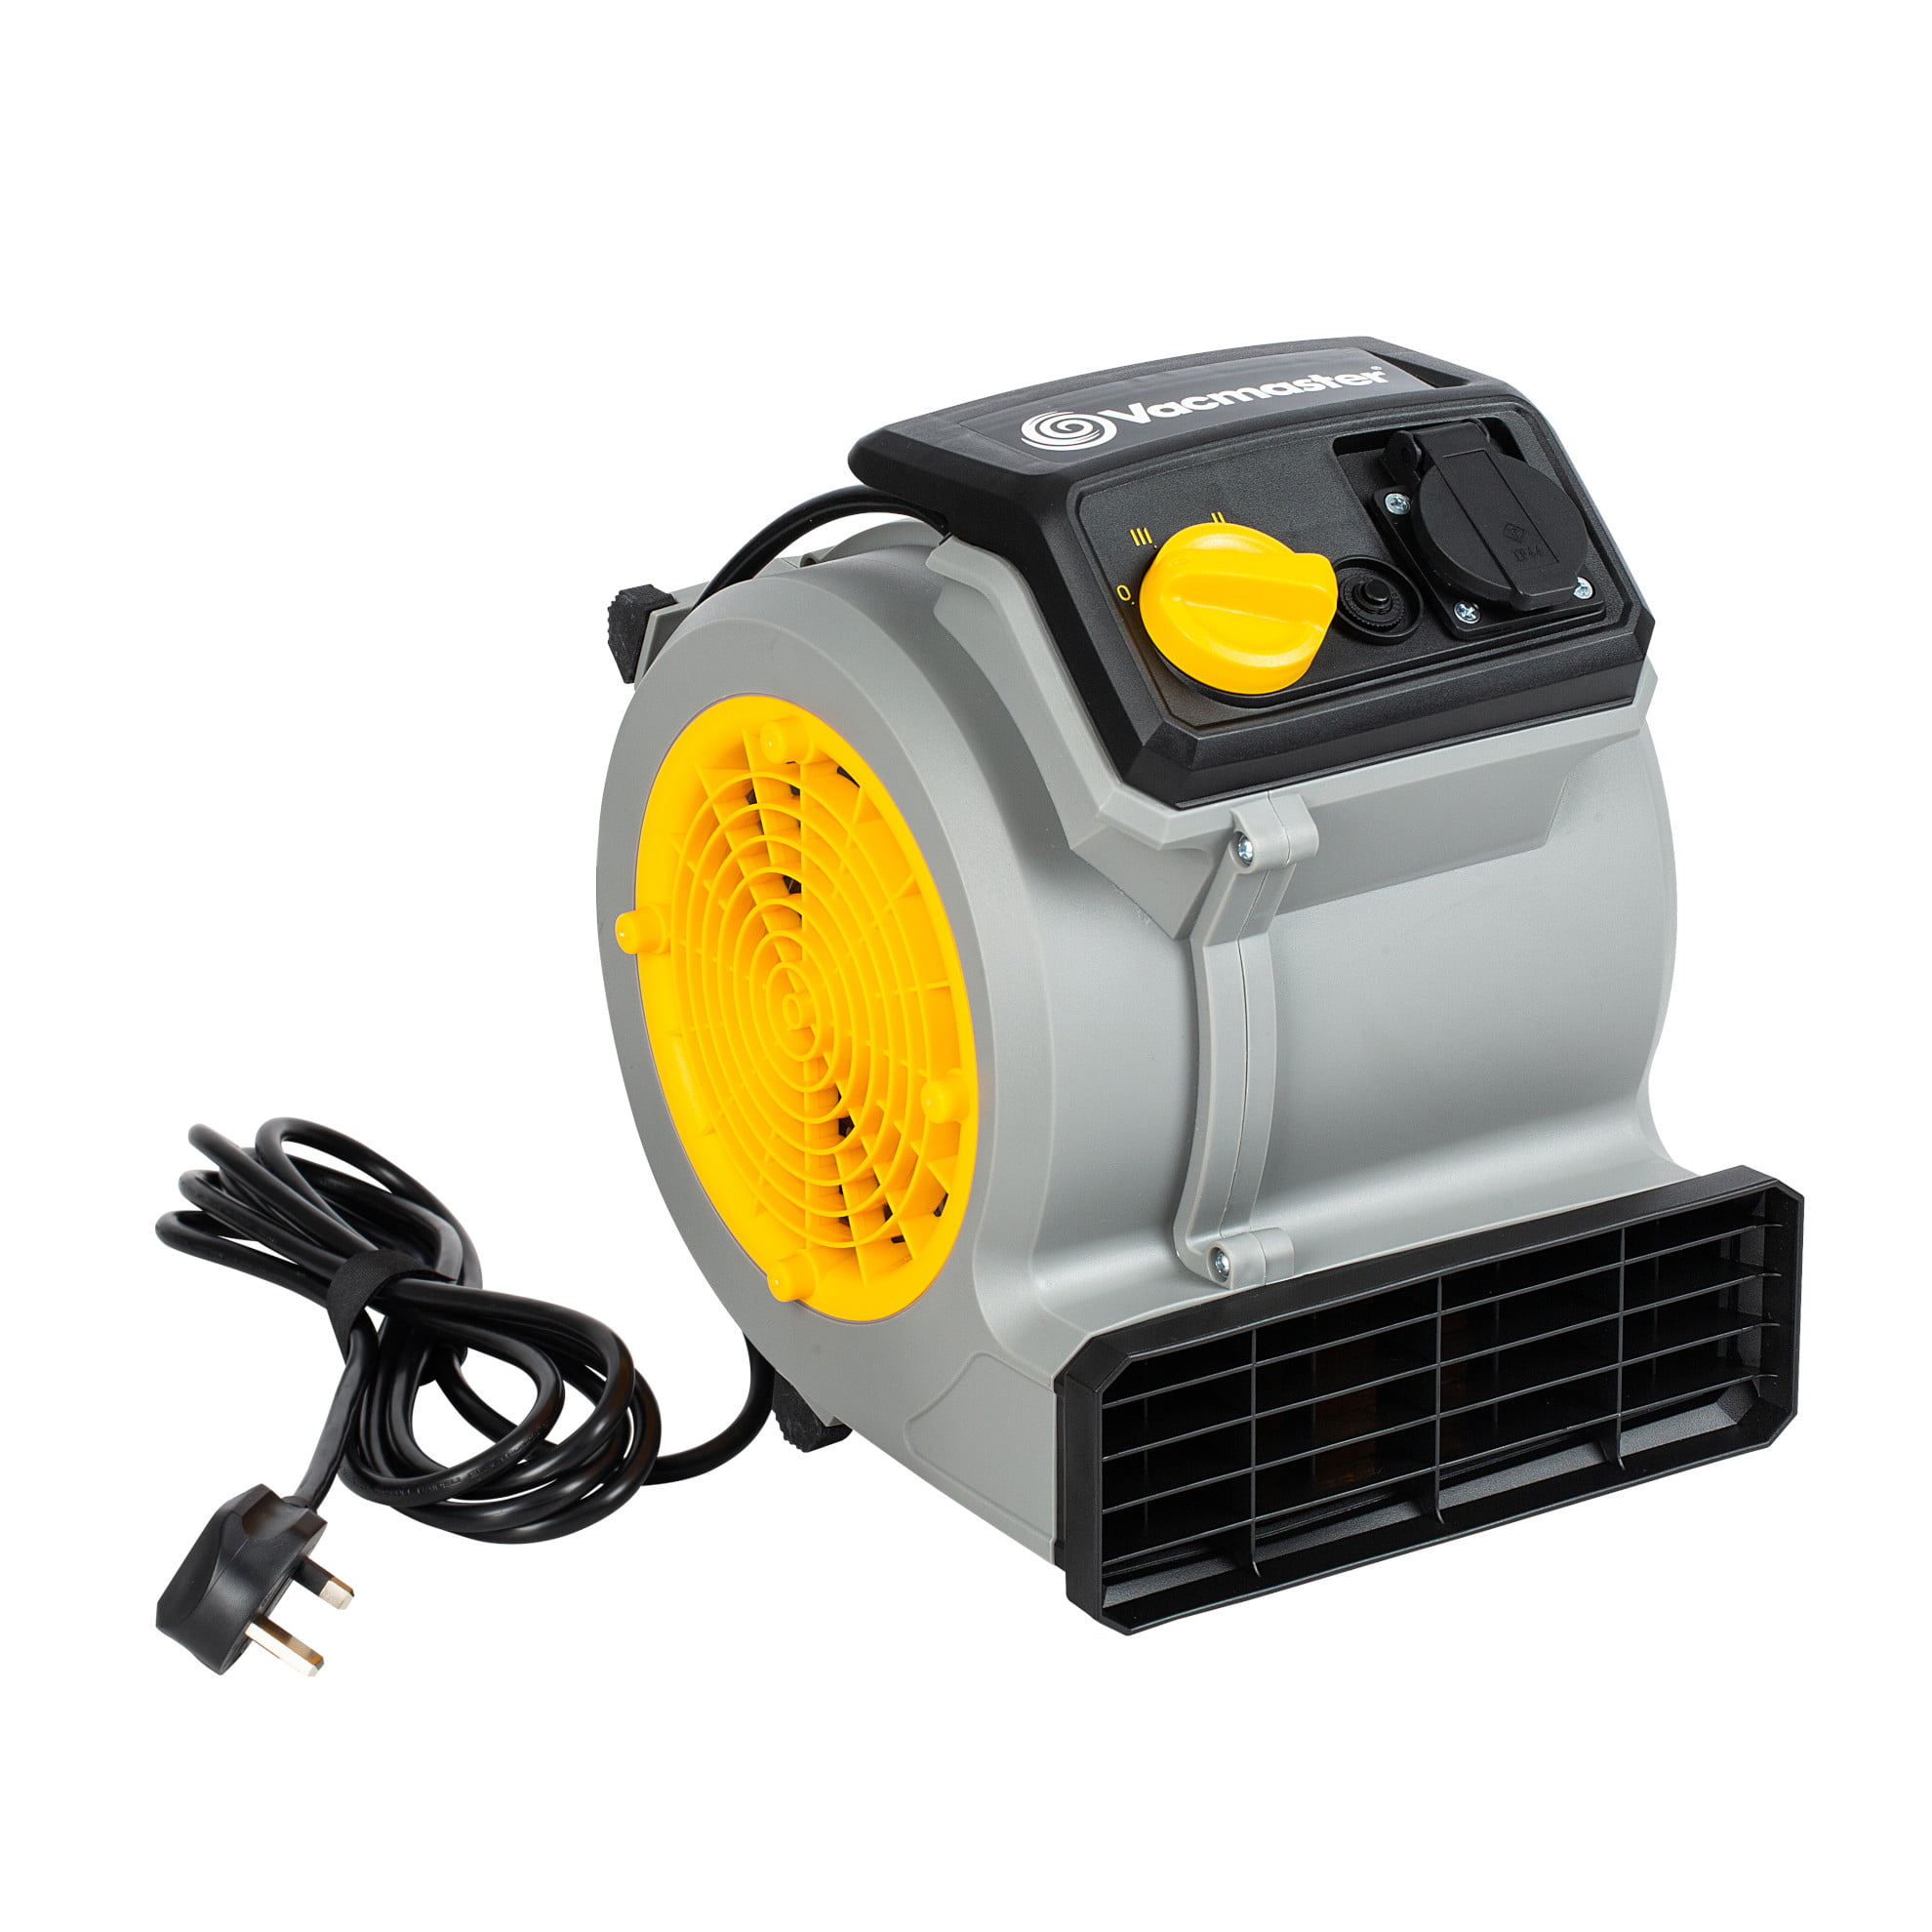 a grey and yellow air mover